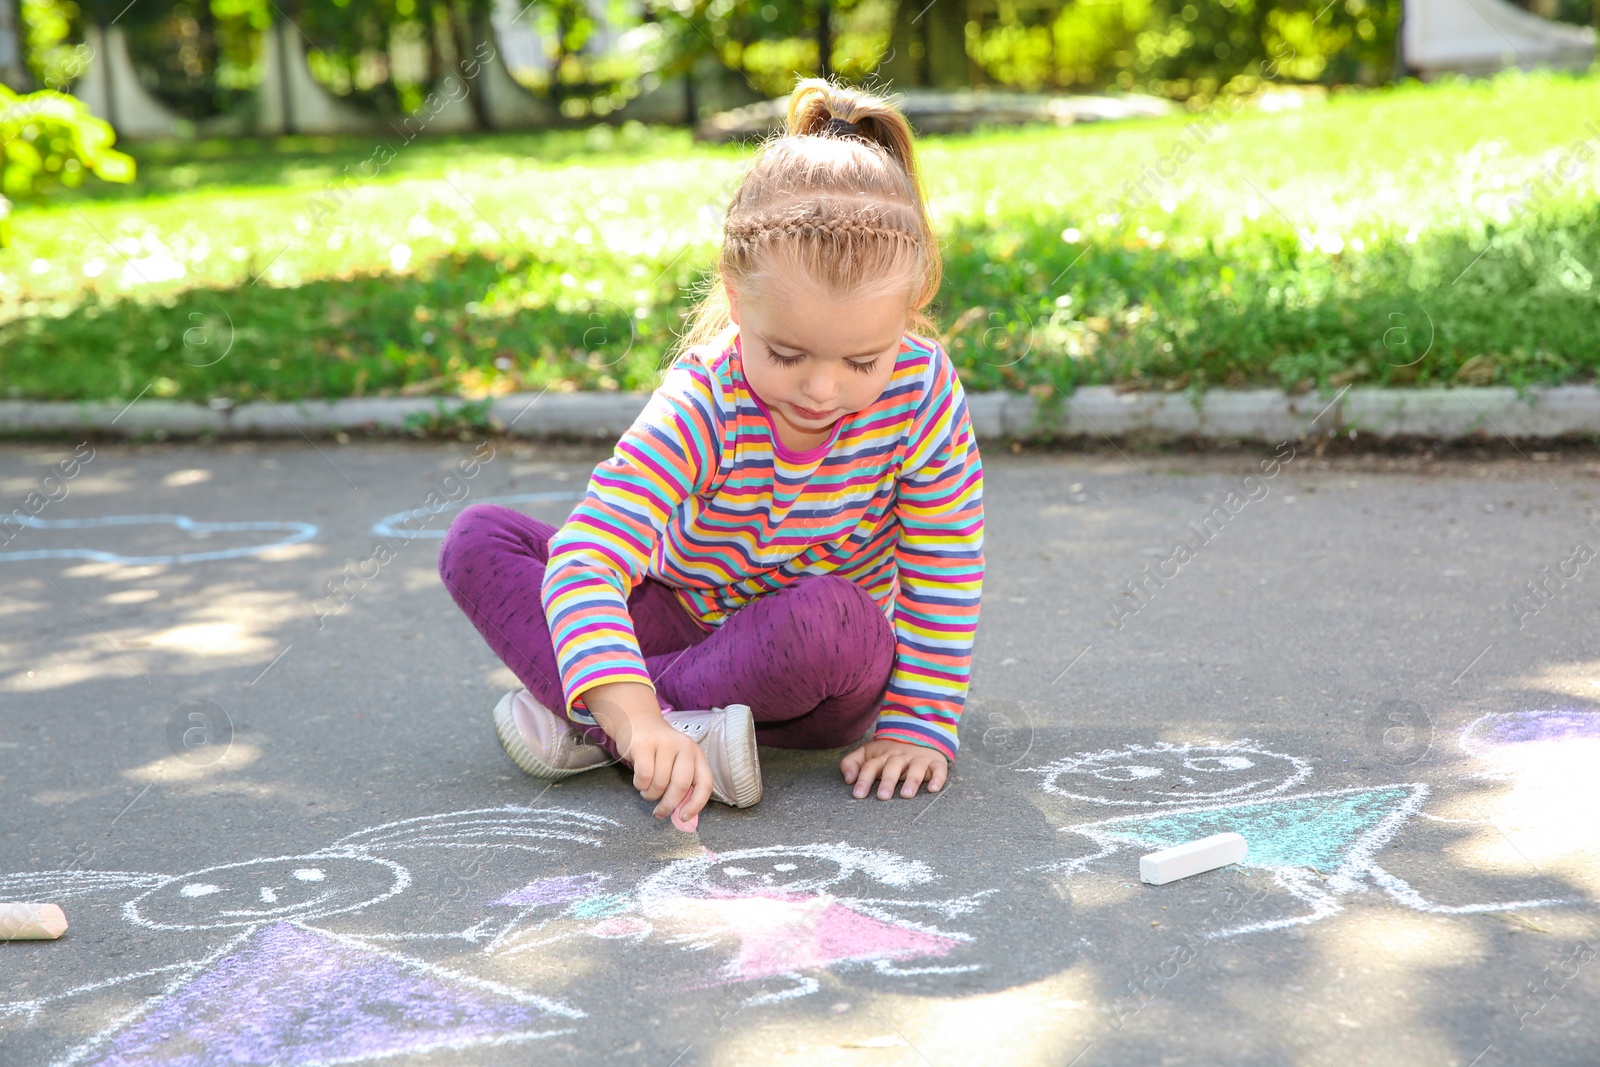 Photo of Little child drawing with colorful chalk on asphalt